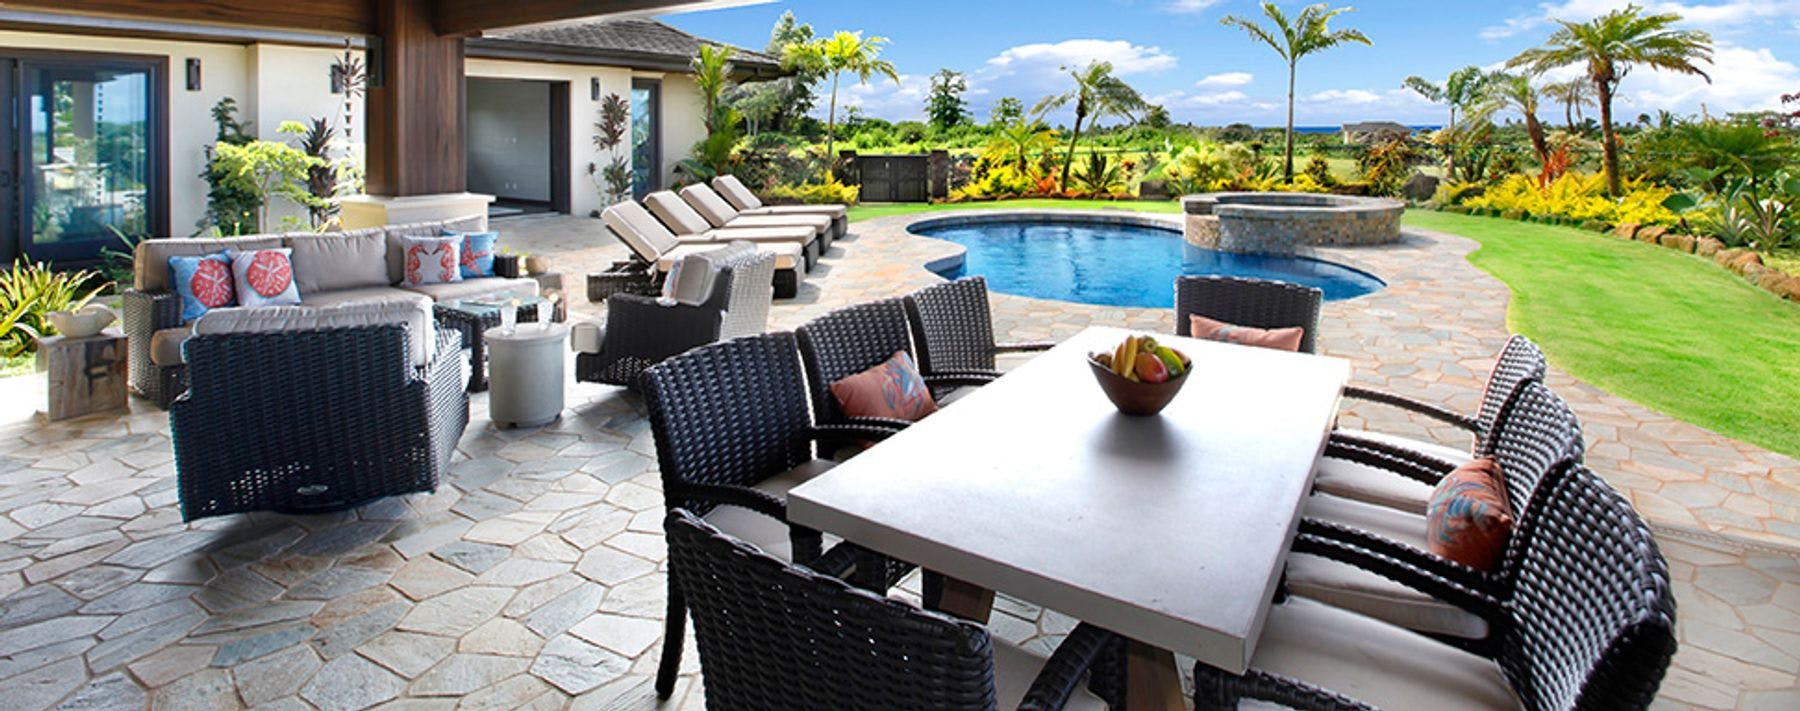 Outdoor living space with private pool at Kauai vacation rental